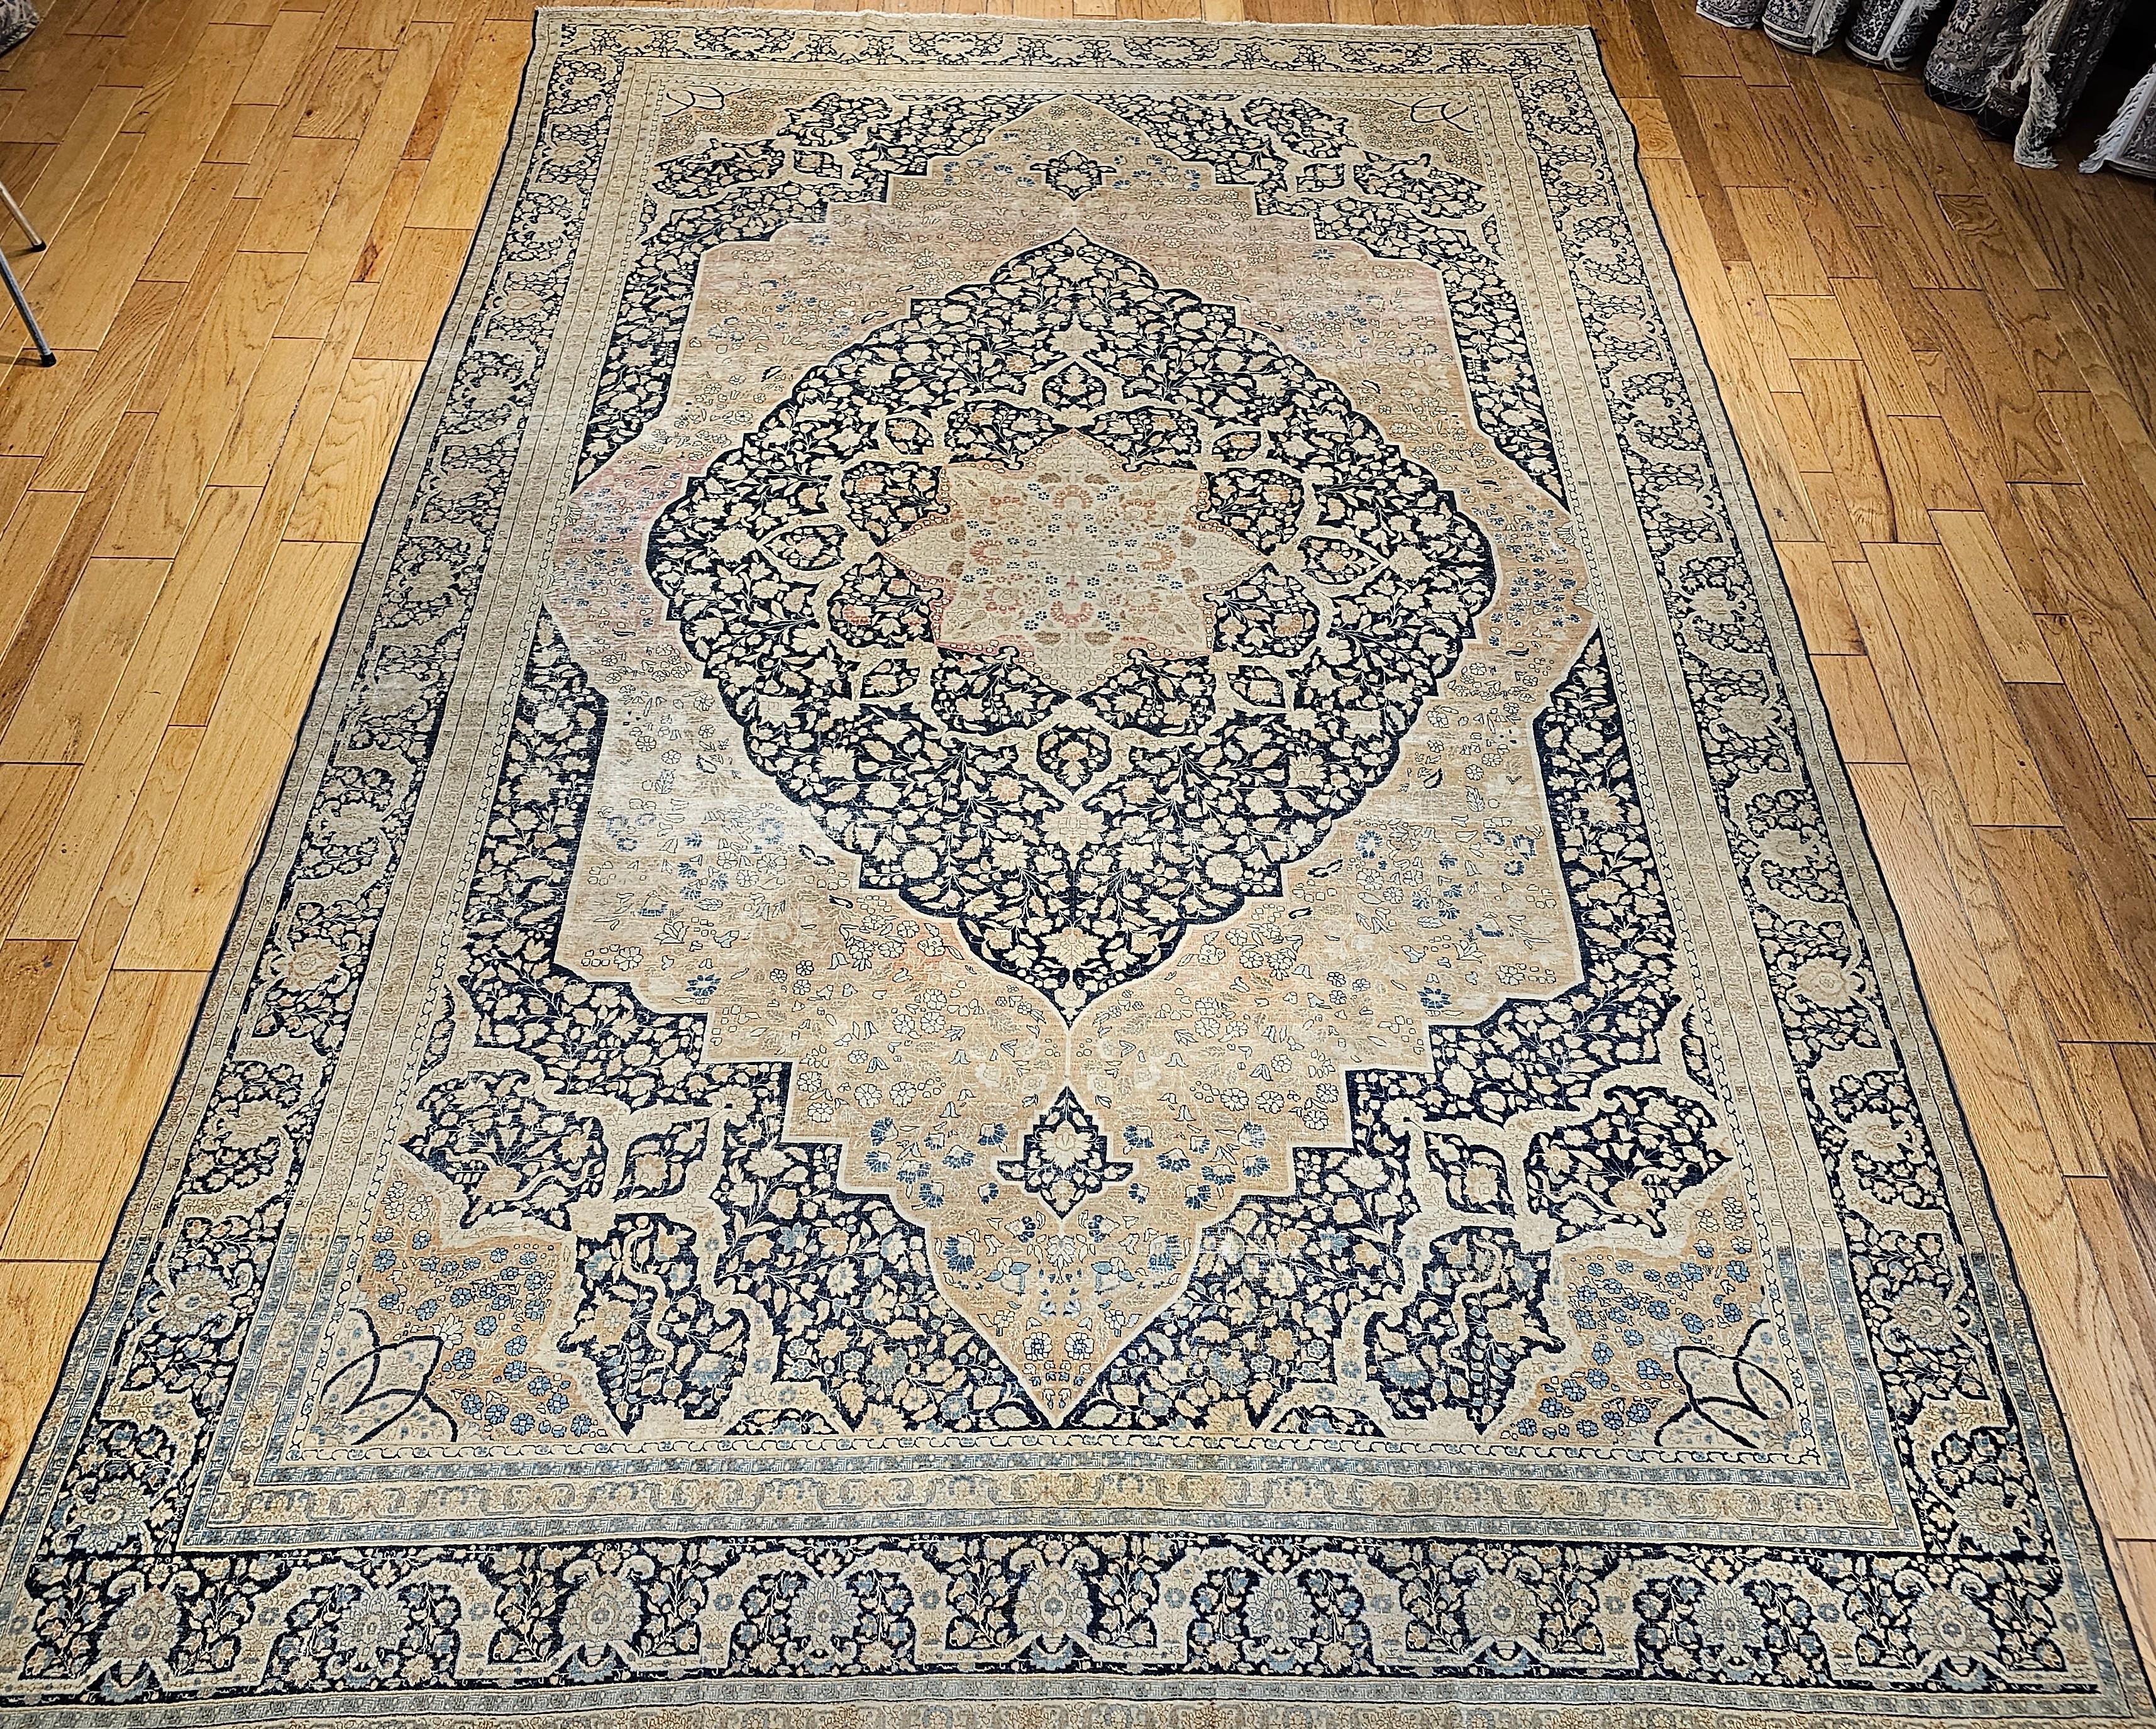 A beautiful Persian Tabriz from the workshop of world renowned master weaver Haji Jalili. Truly a masterpiece of Persian 19th-century weaving. A large central medallion integrates design in cream color set in an indigo ground, sand, baby blue, pale